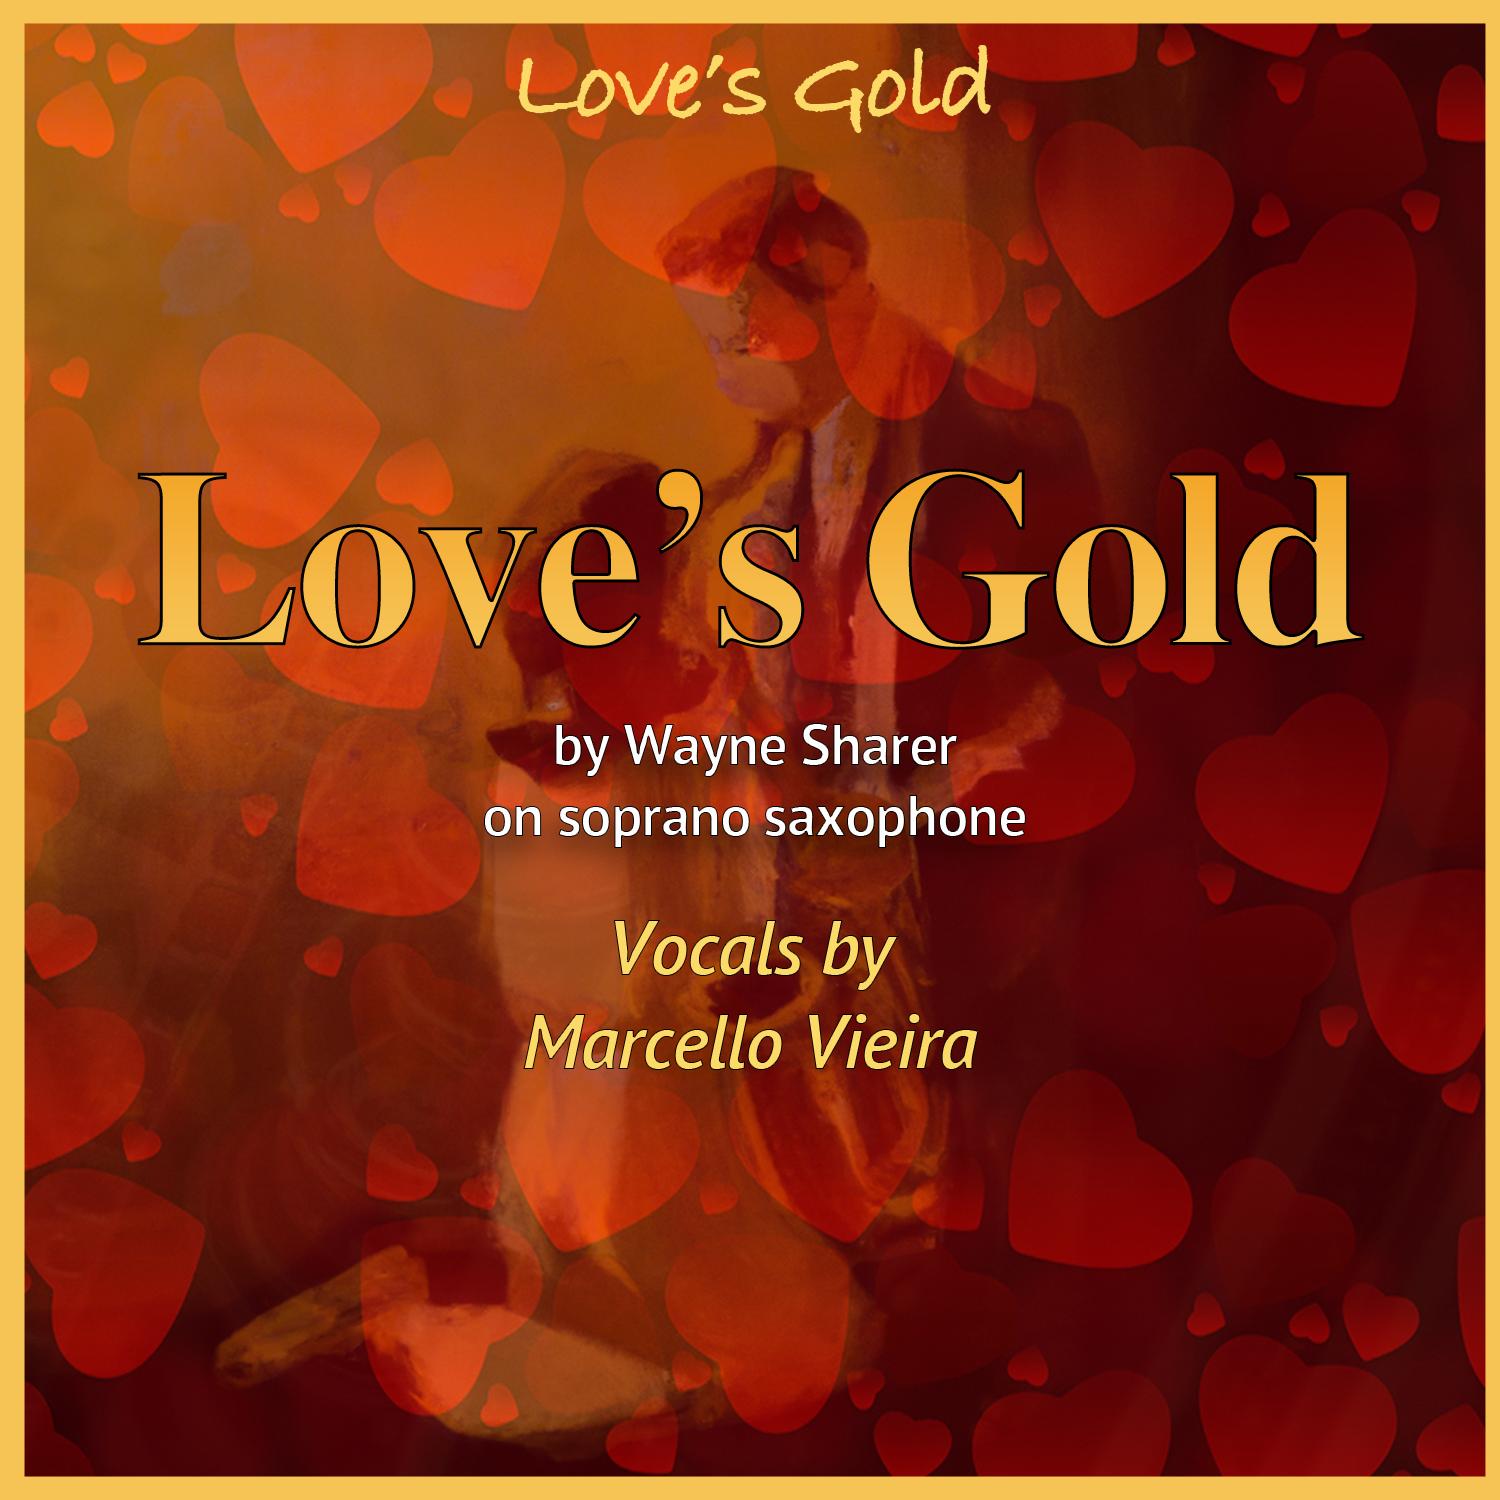 Love's Gold by Wayne Sharer, vocals by Marcello Vieira